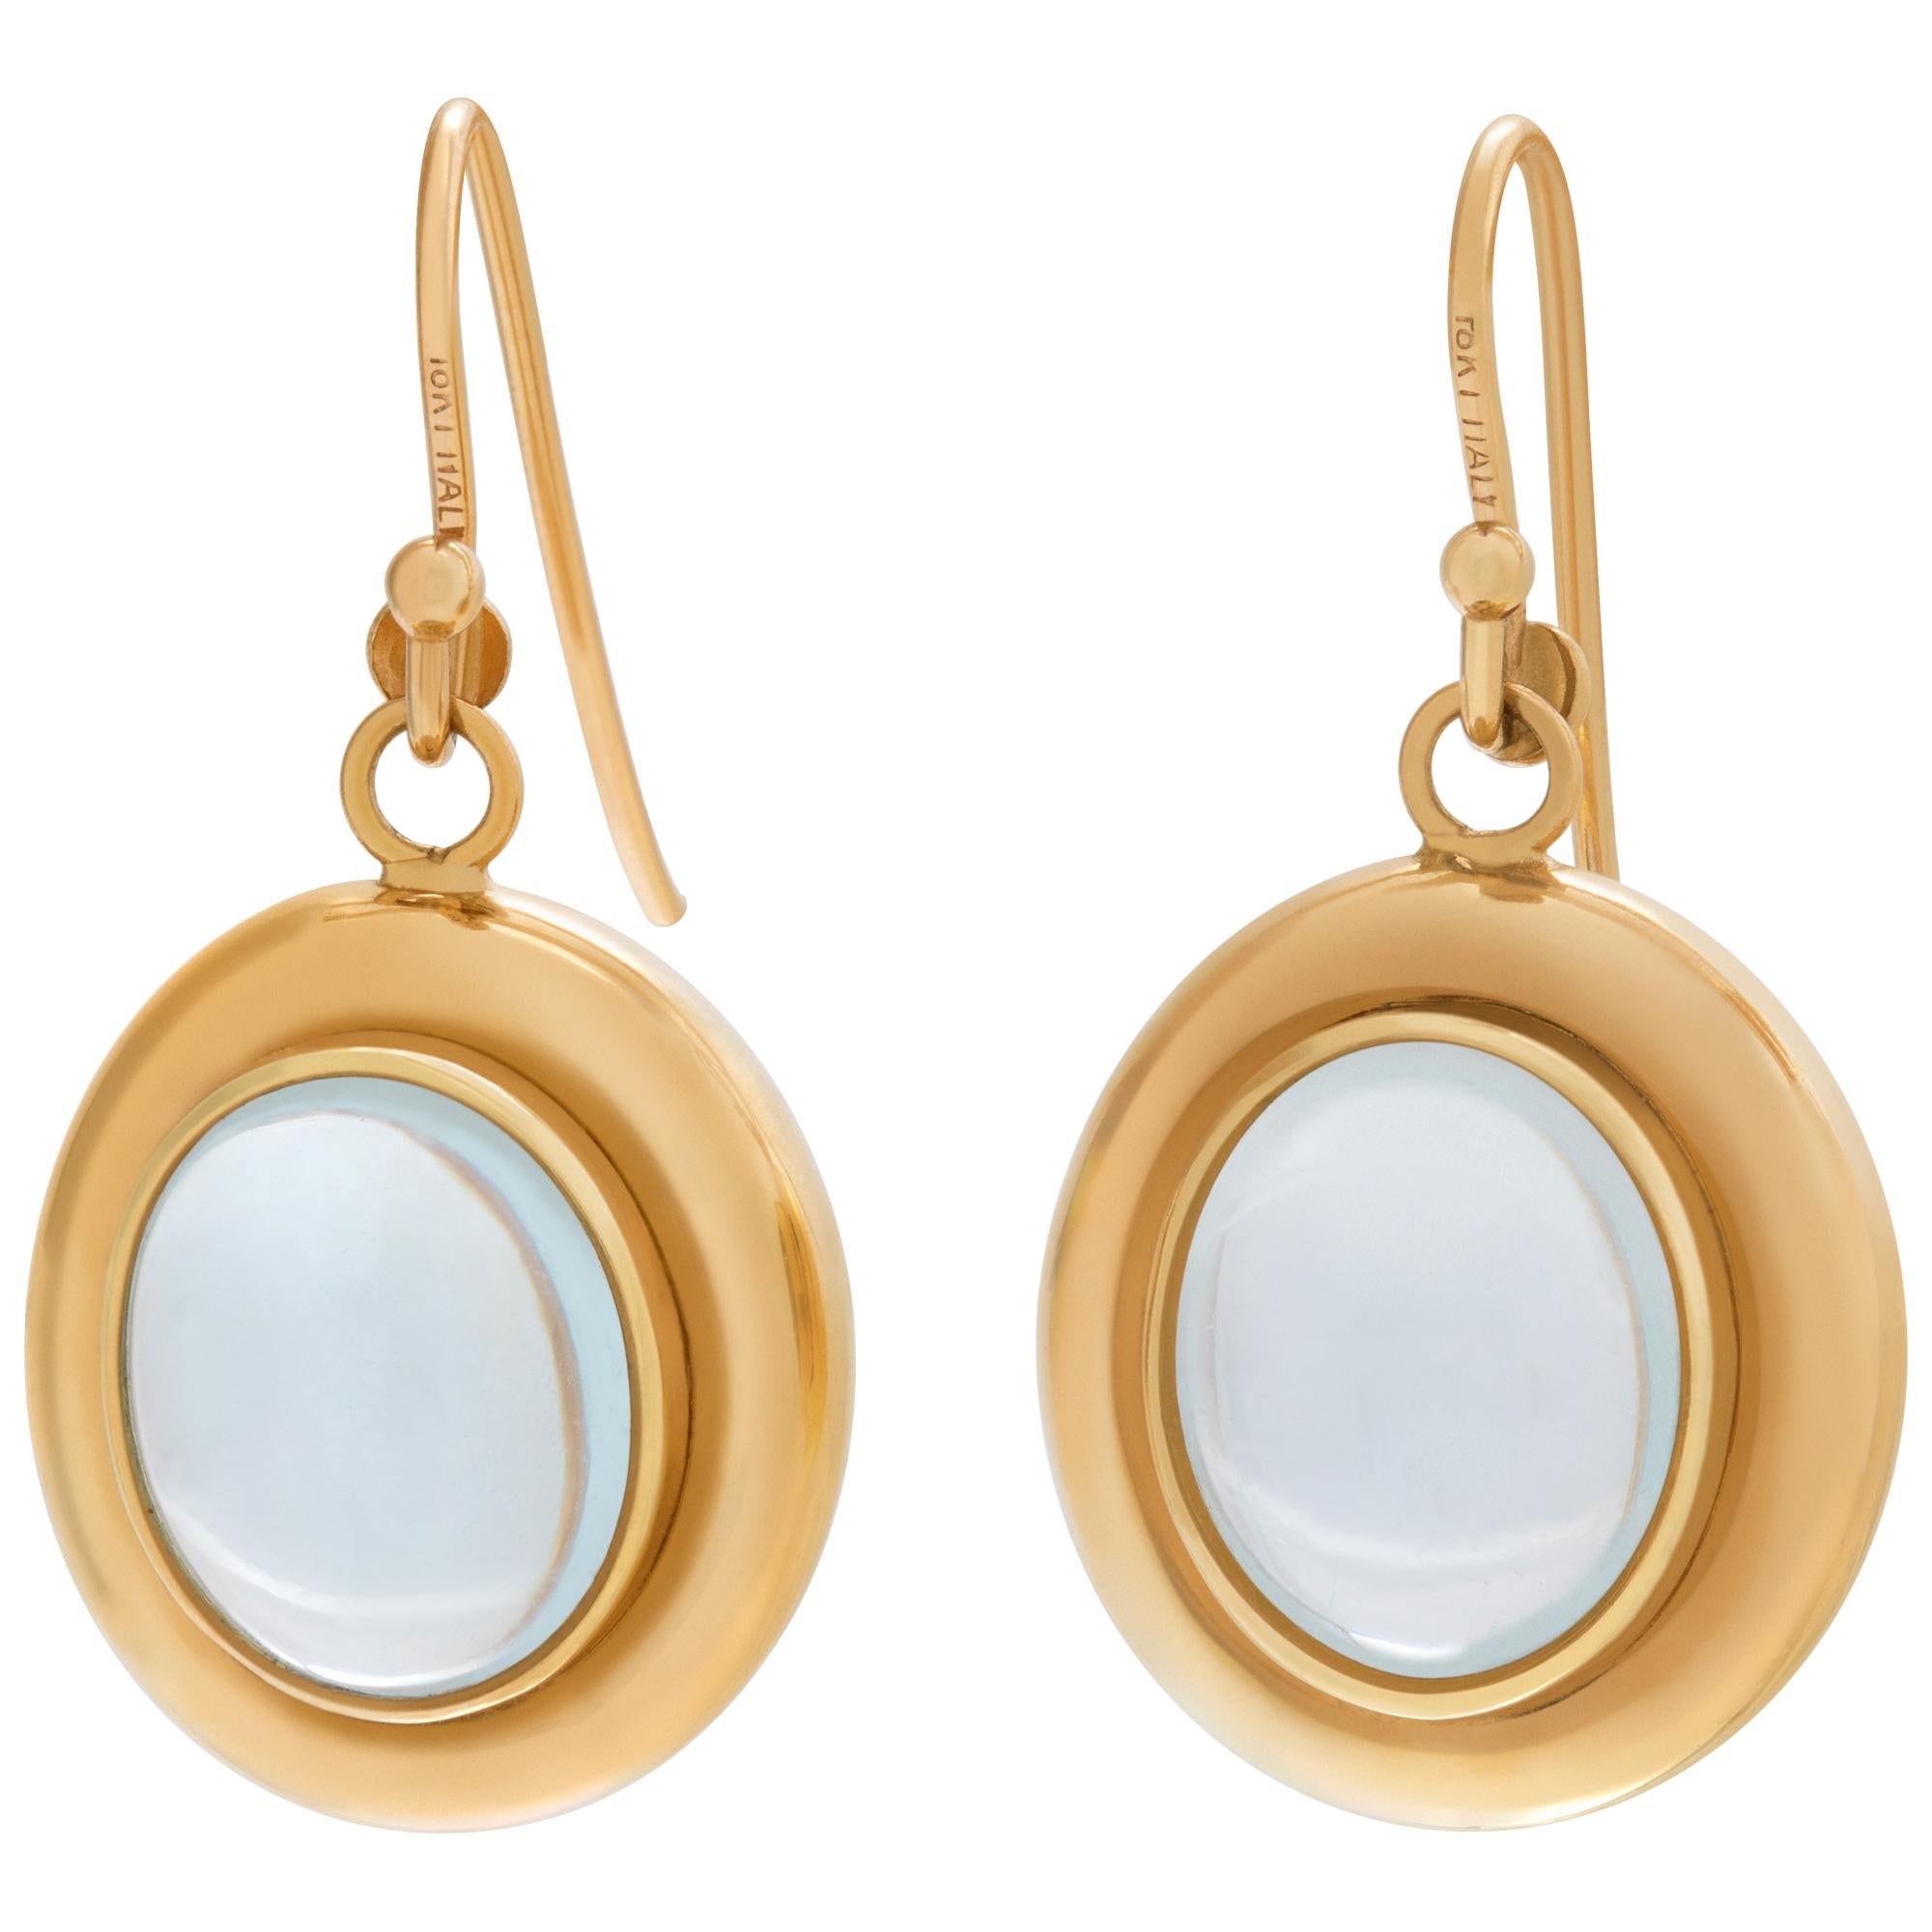 Cabochon Blue Topaz earrings set in 14k yellow gold. Hanging length is 25 mm.
